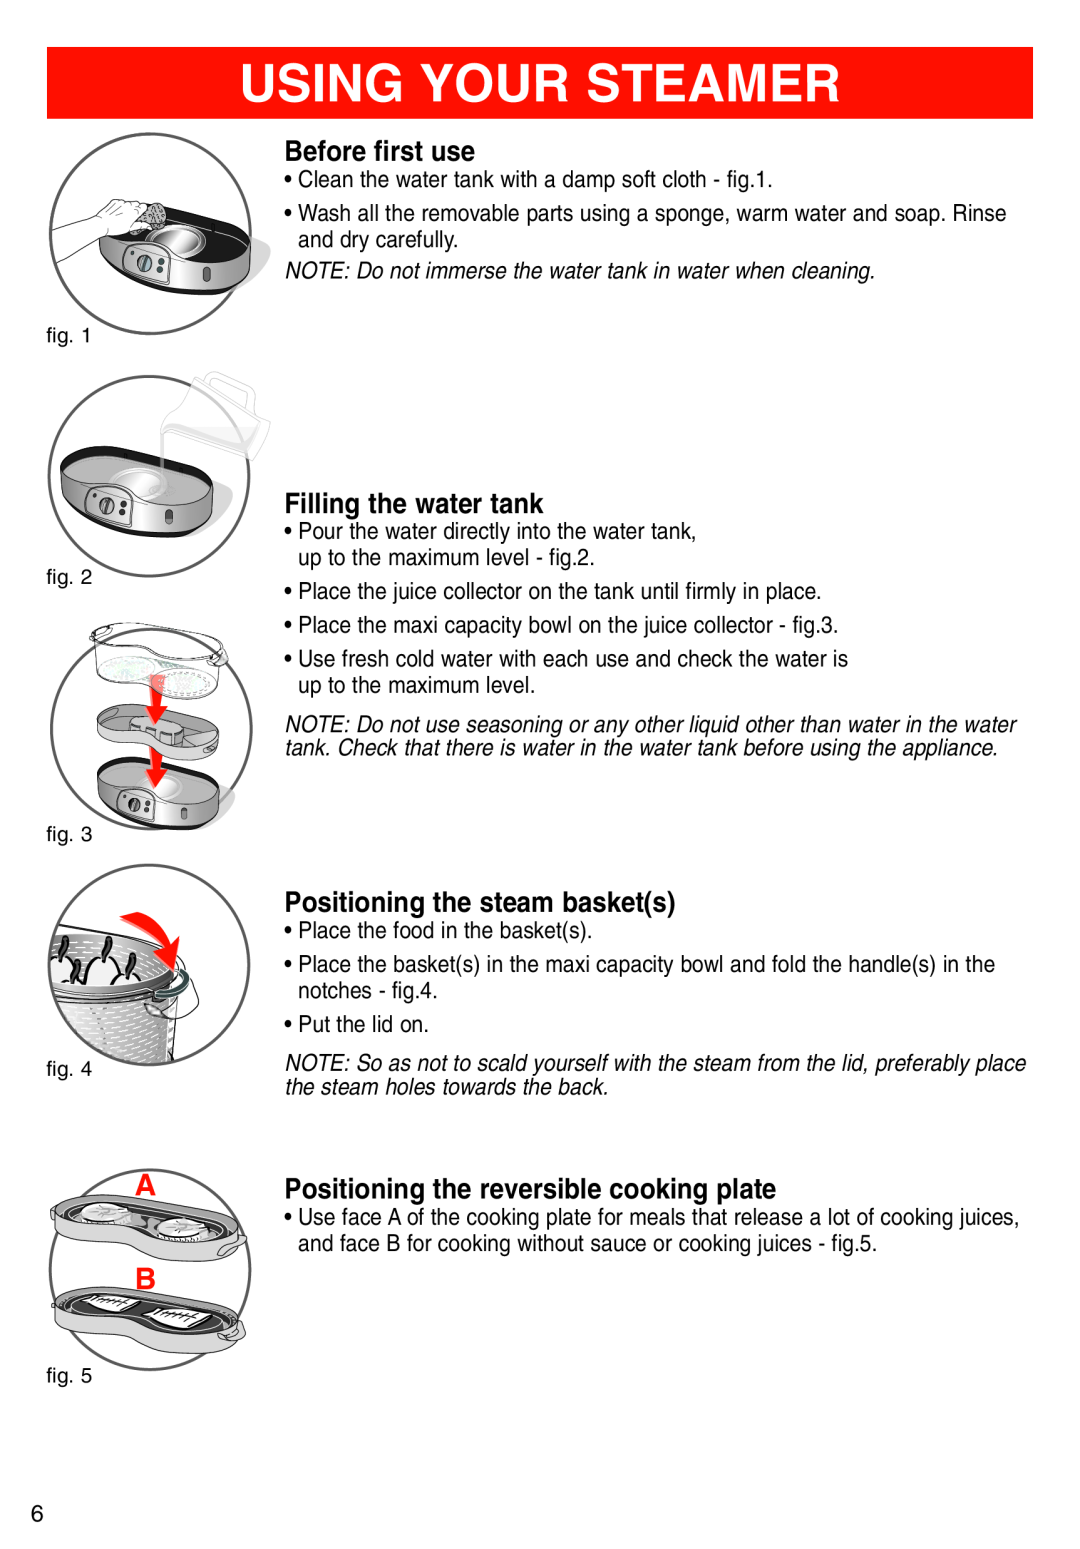 T-Fal manual Using Your Steamer, Before first use, Filling the water tank, Positioning the steam baskets 